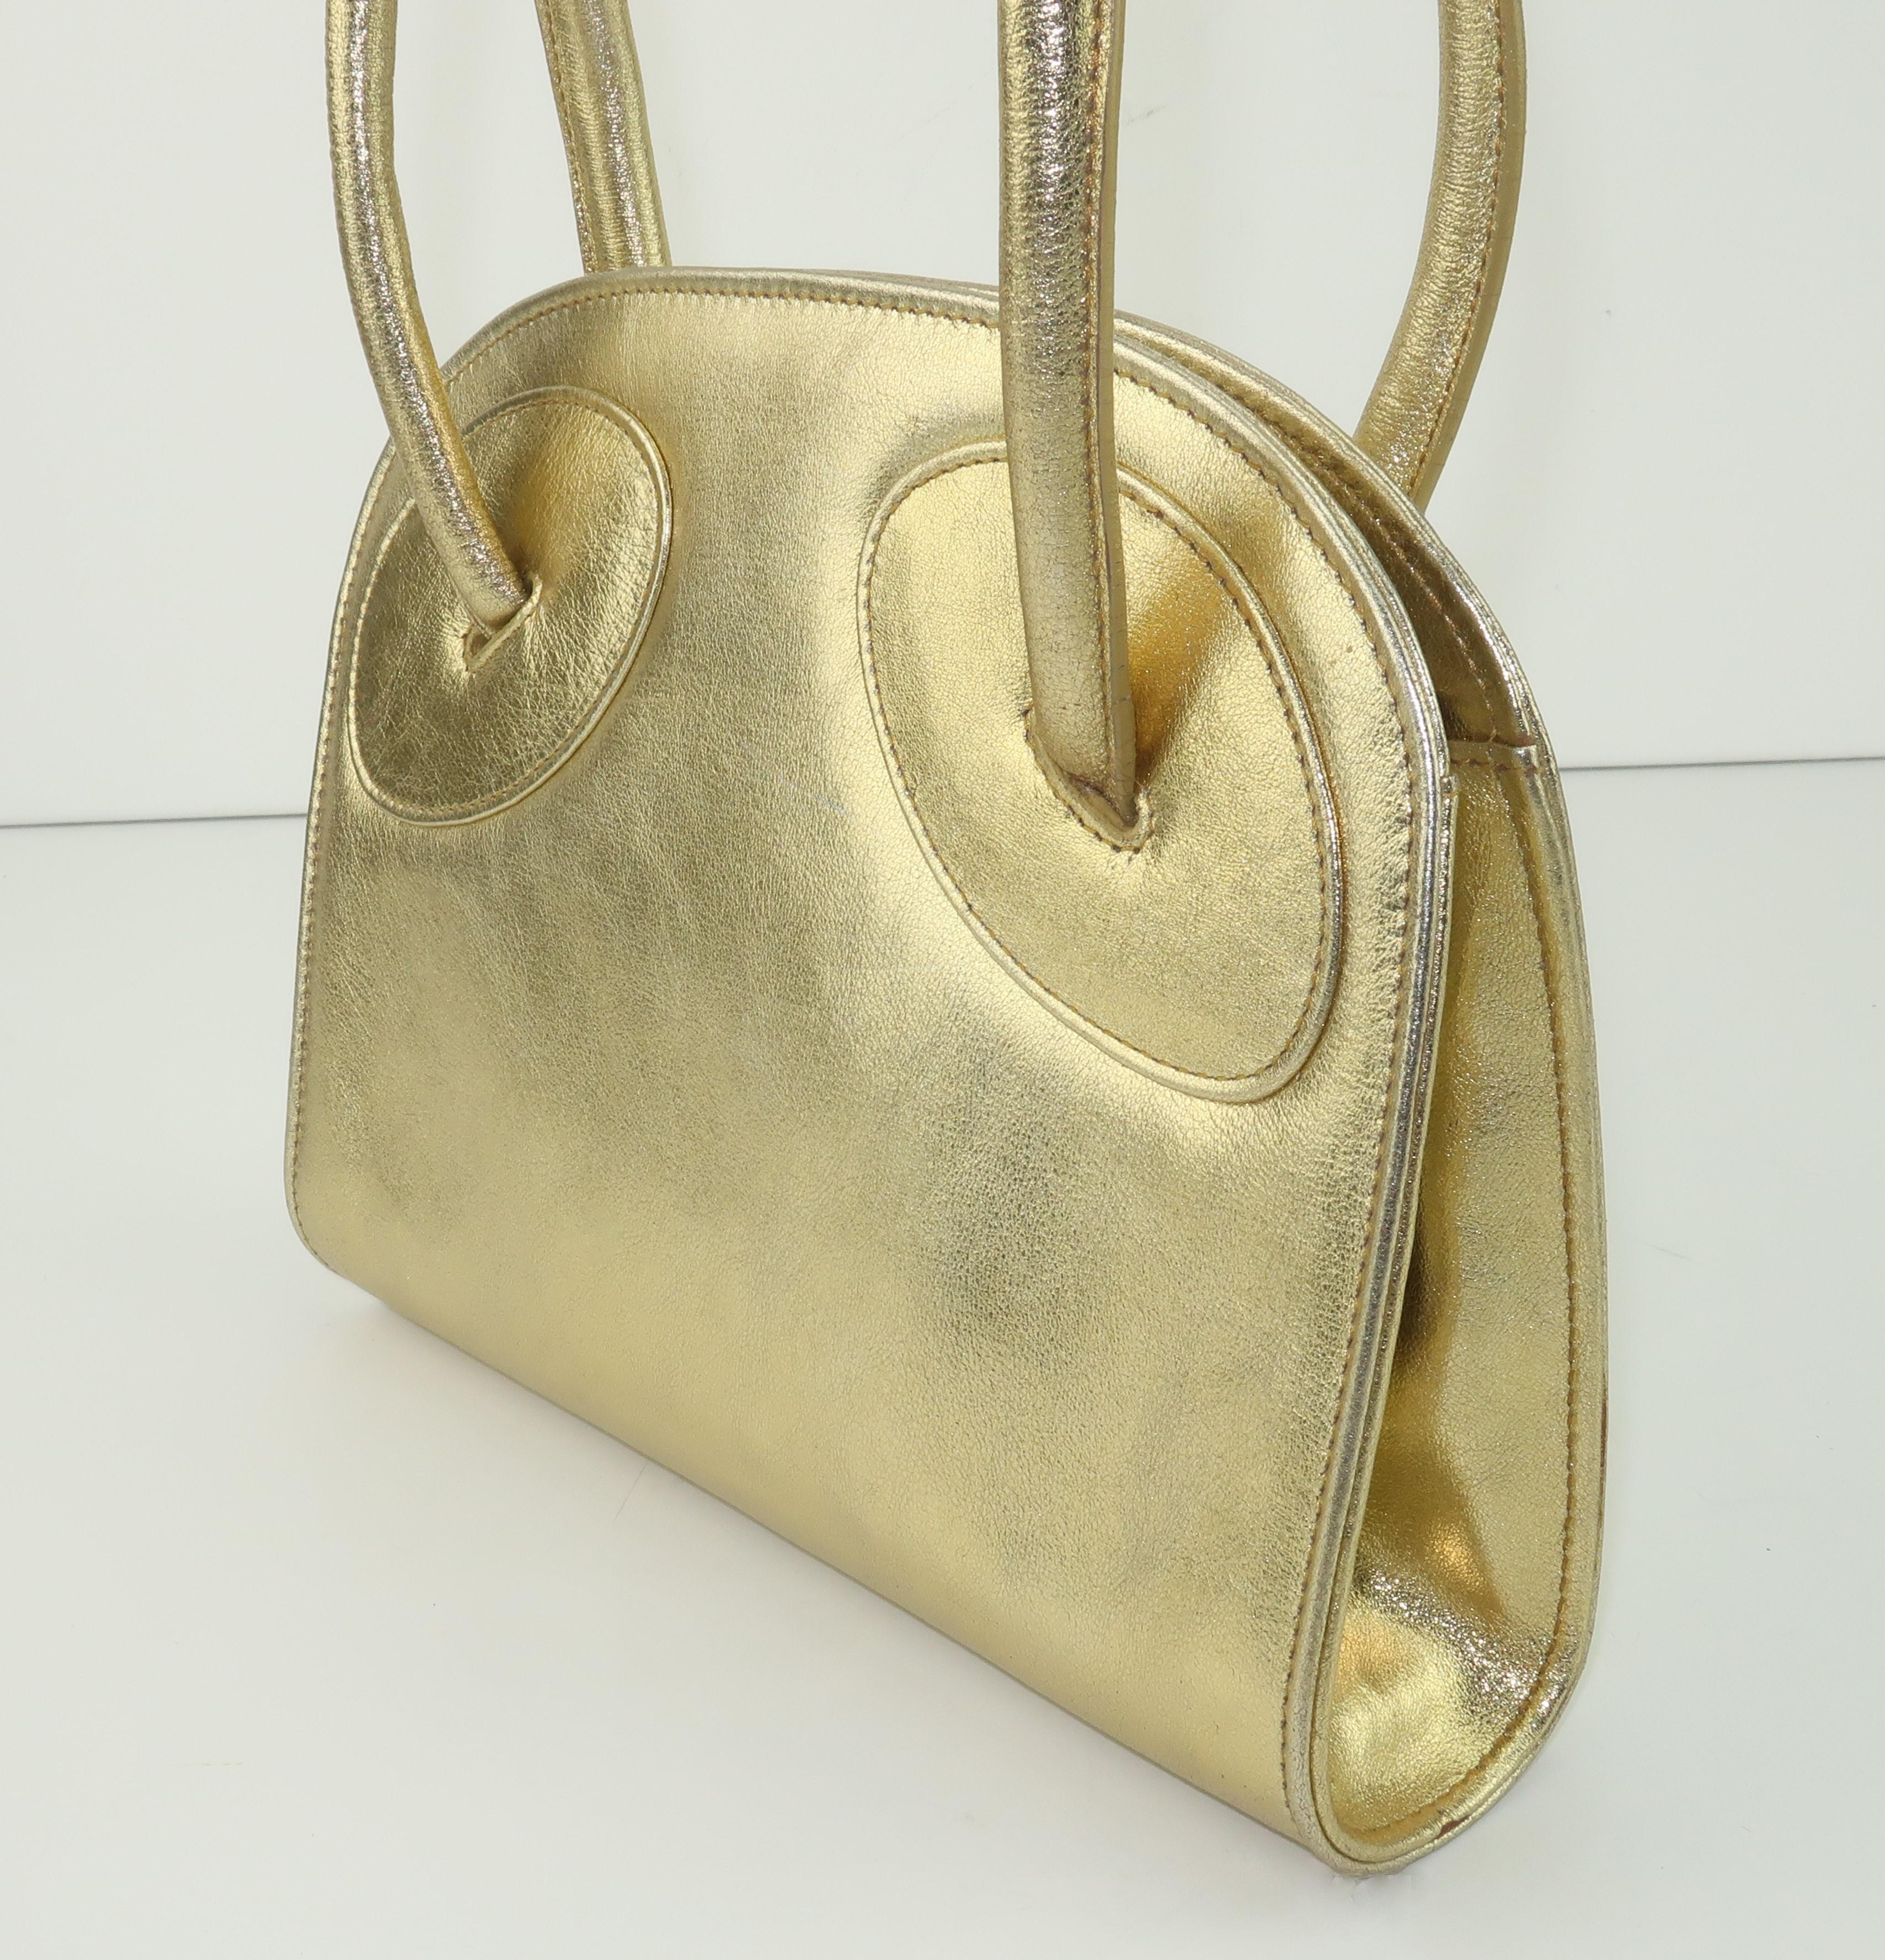 Laura Biagiotti Attributed Gold Leather Handbag, 1970's For Sale 4